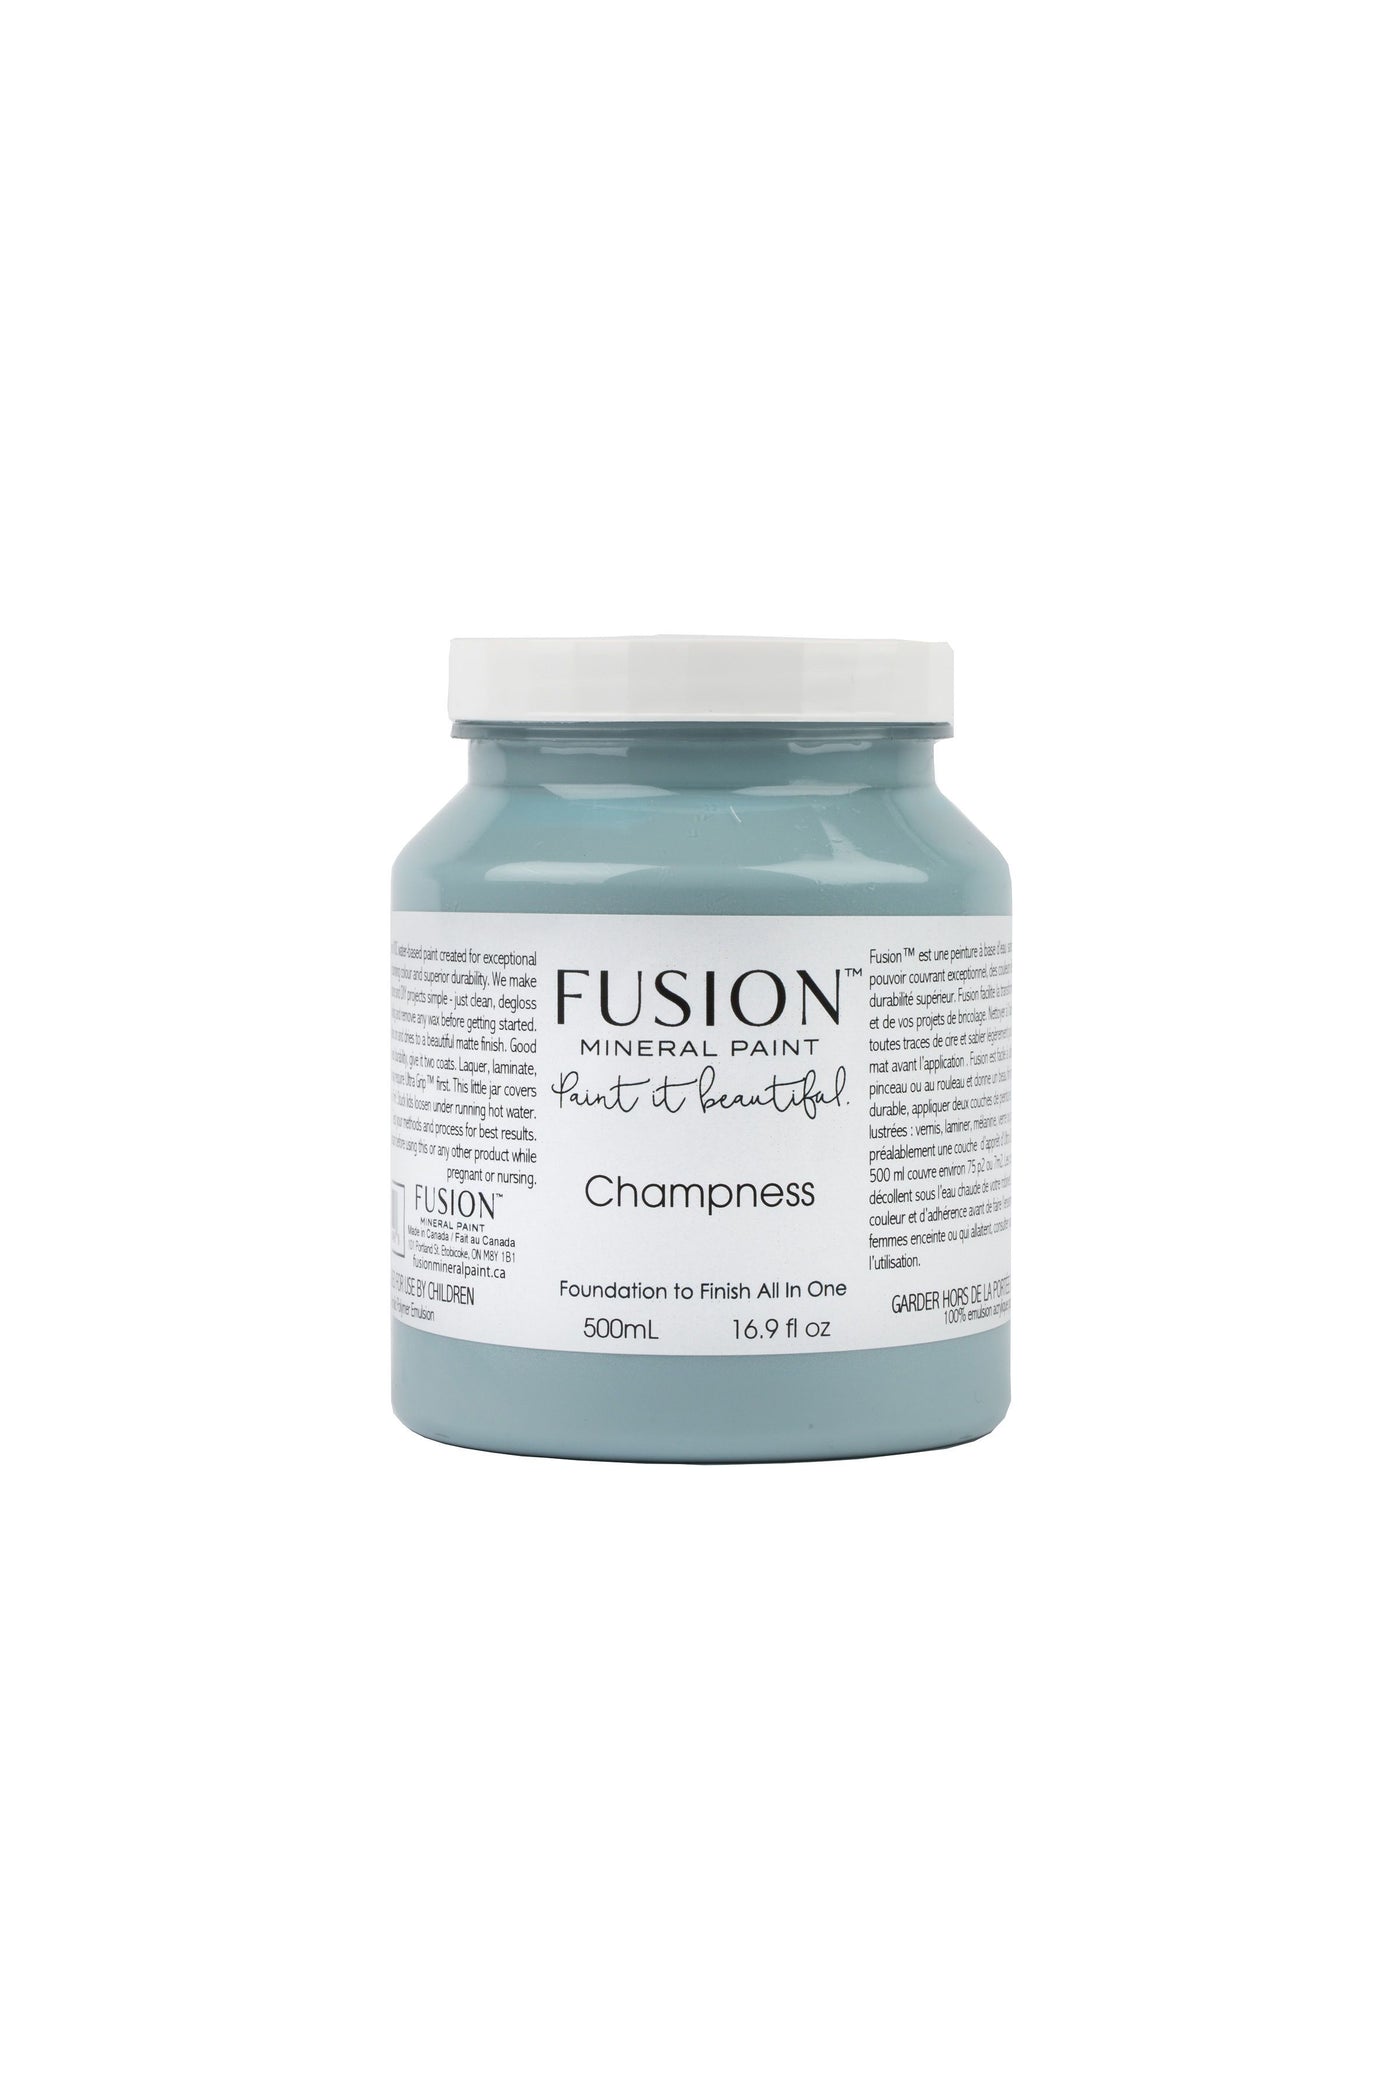 Champness Fusion Mineral Paint sky blue 500ml For the Love Creations